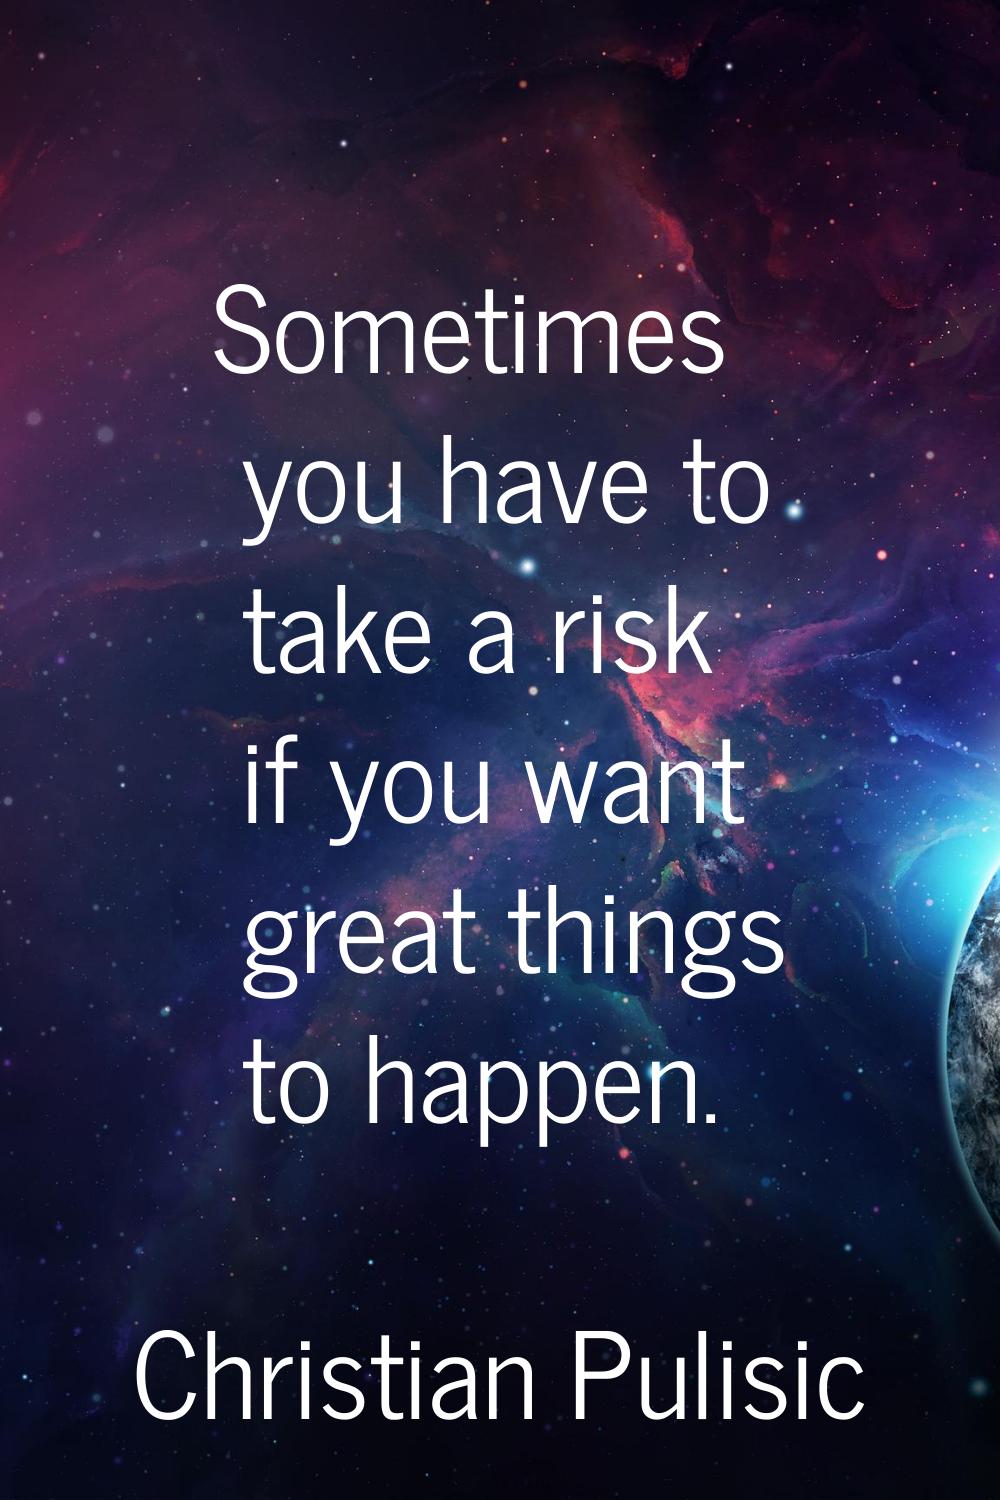 Sometimes you have to take a risk if you want great things to happen.